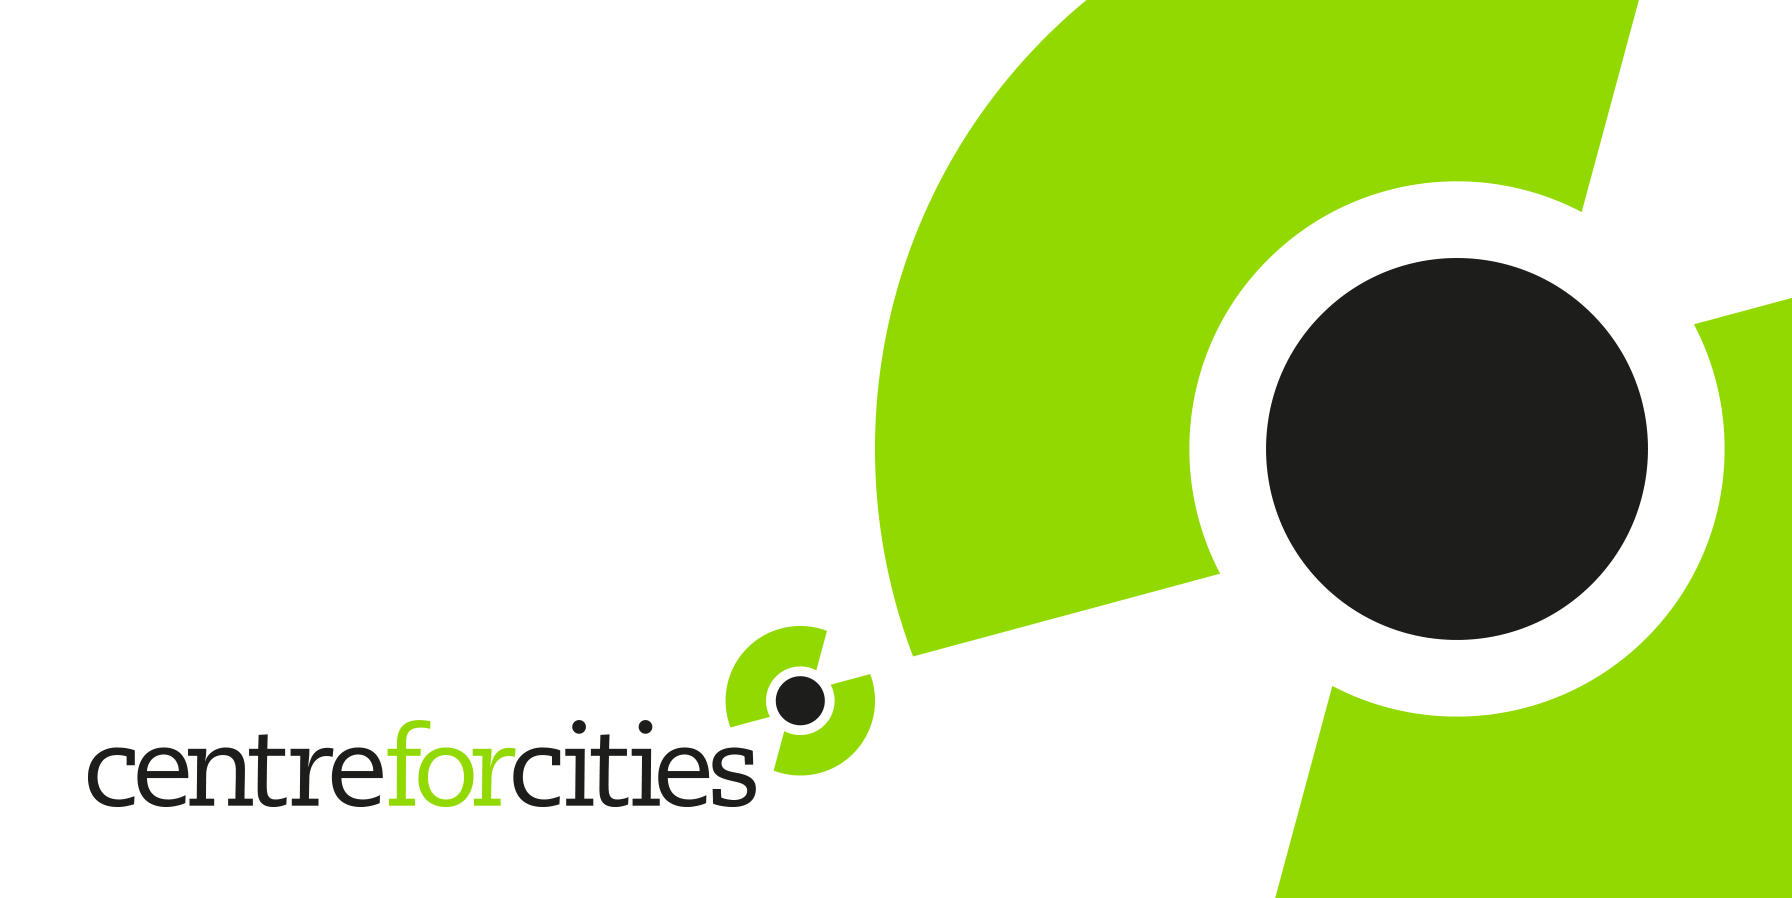 www.centreforcities.org